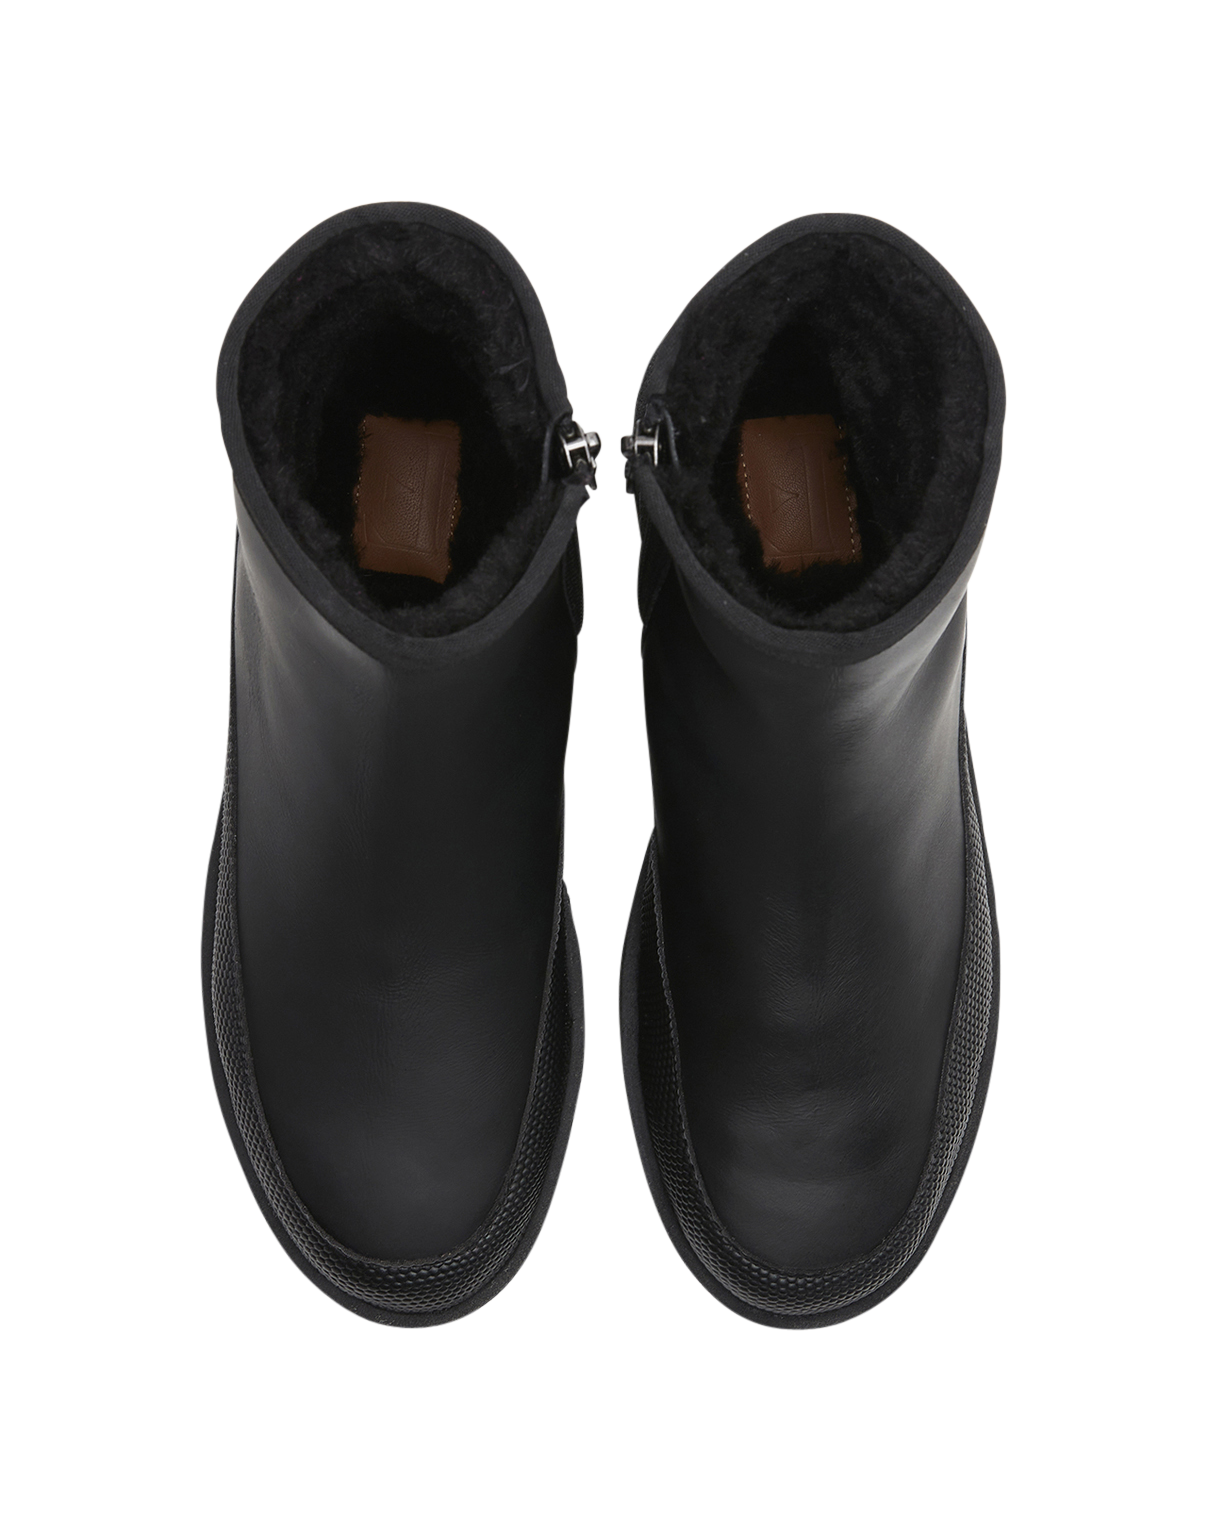 Aria Coated Leather Black Chelsea Boots 1020919126-014 - 05